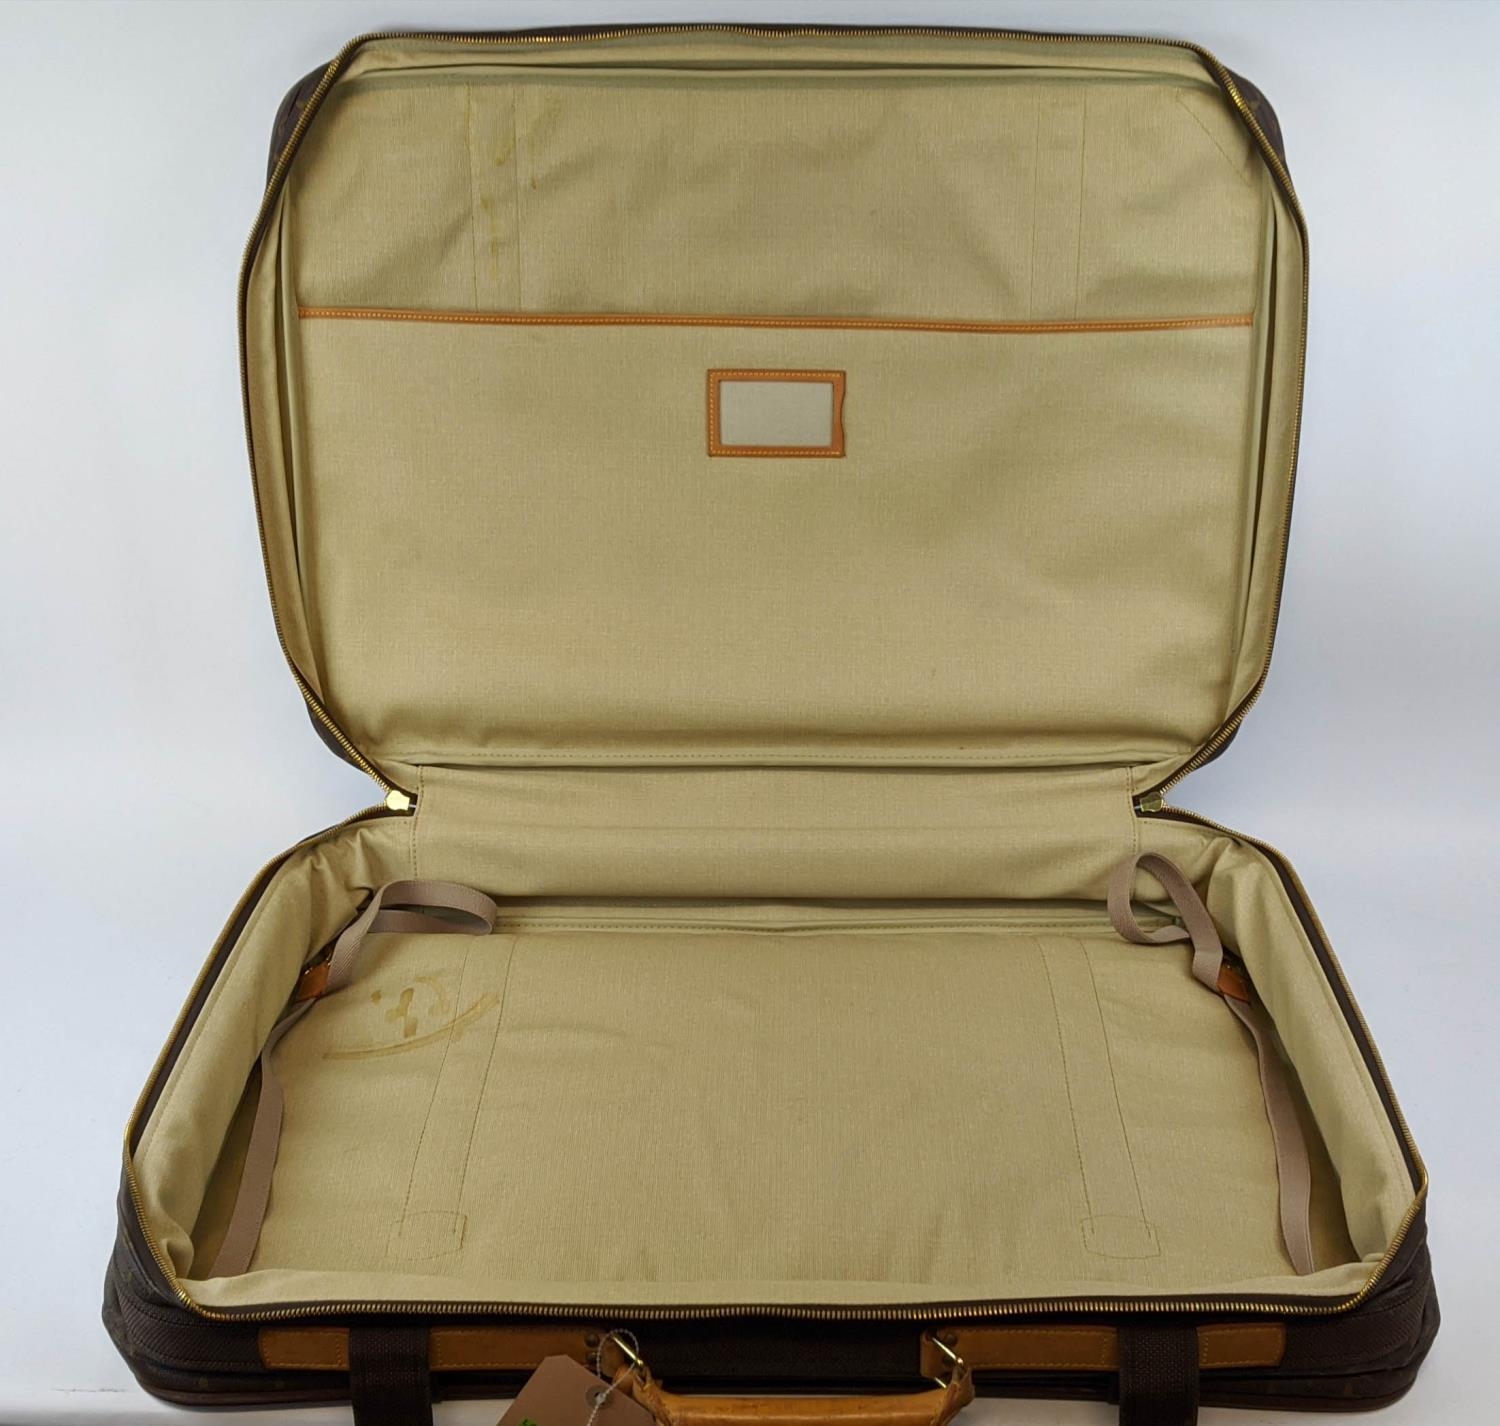 LOUIS VUITTON SATELLITE 70 SUITCASE, monogram canvas and leather, brass hardware, double buckle - Image 6 of 8